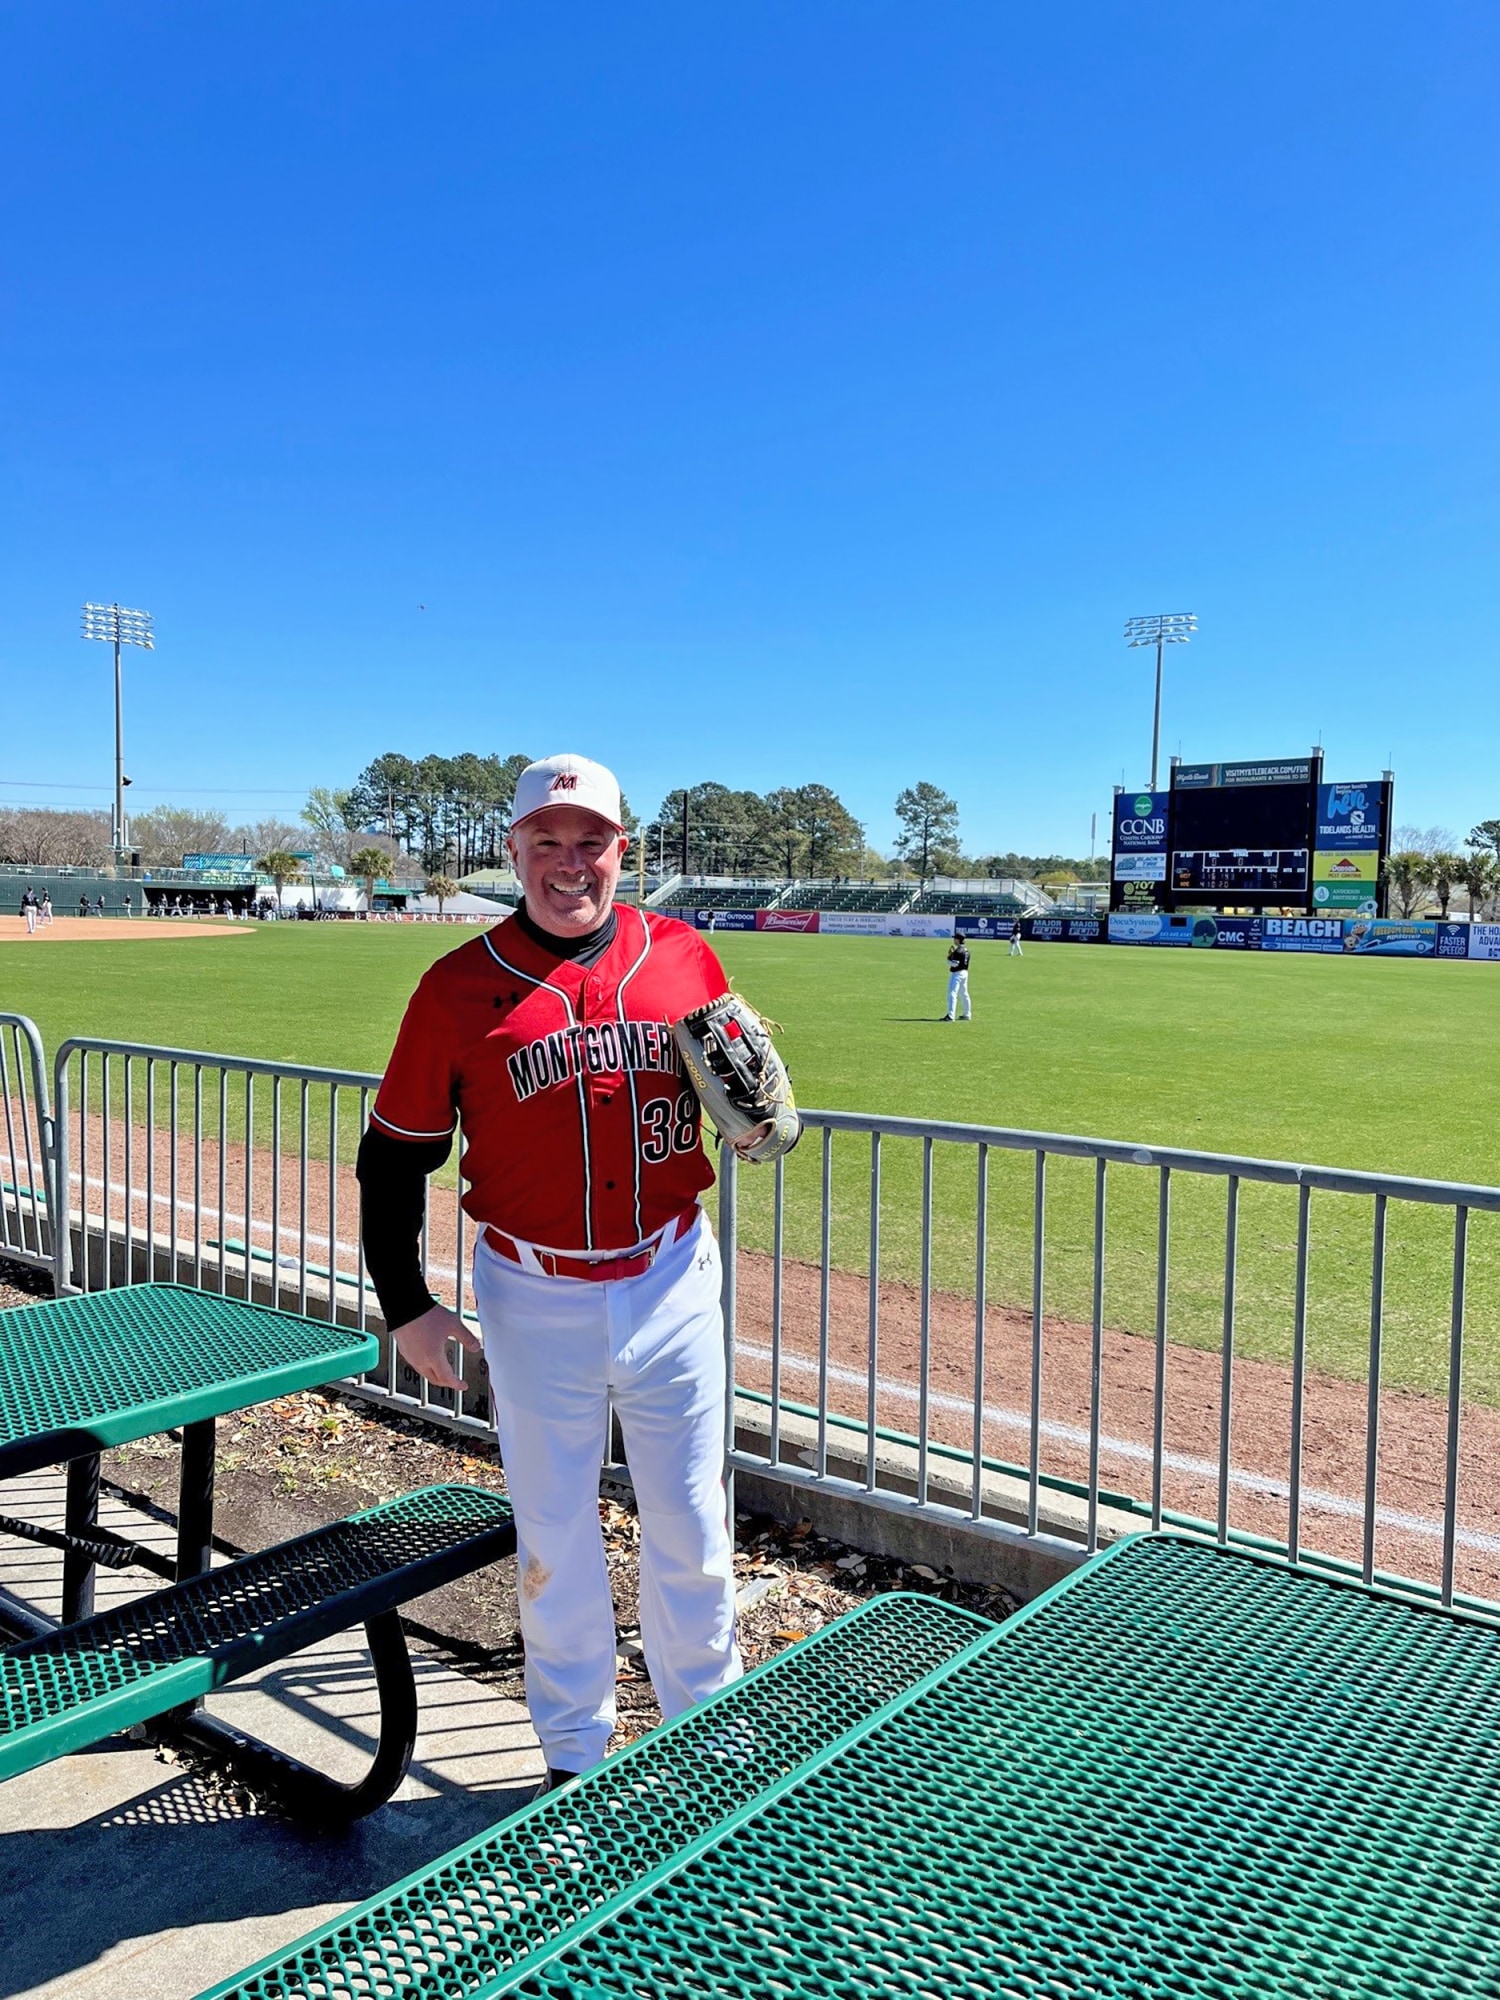 56-Year-Old Man Is Achieving His Dream of Playing College Baseball